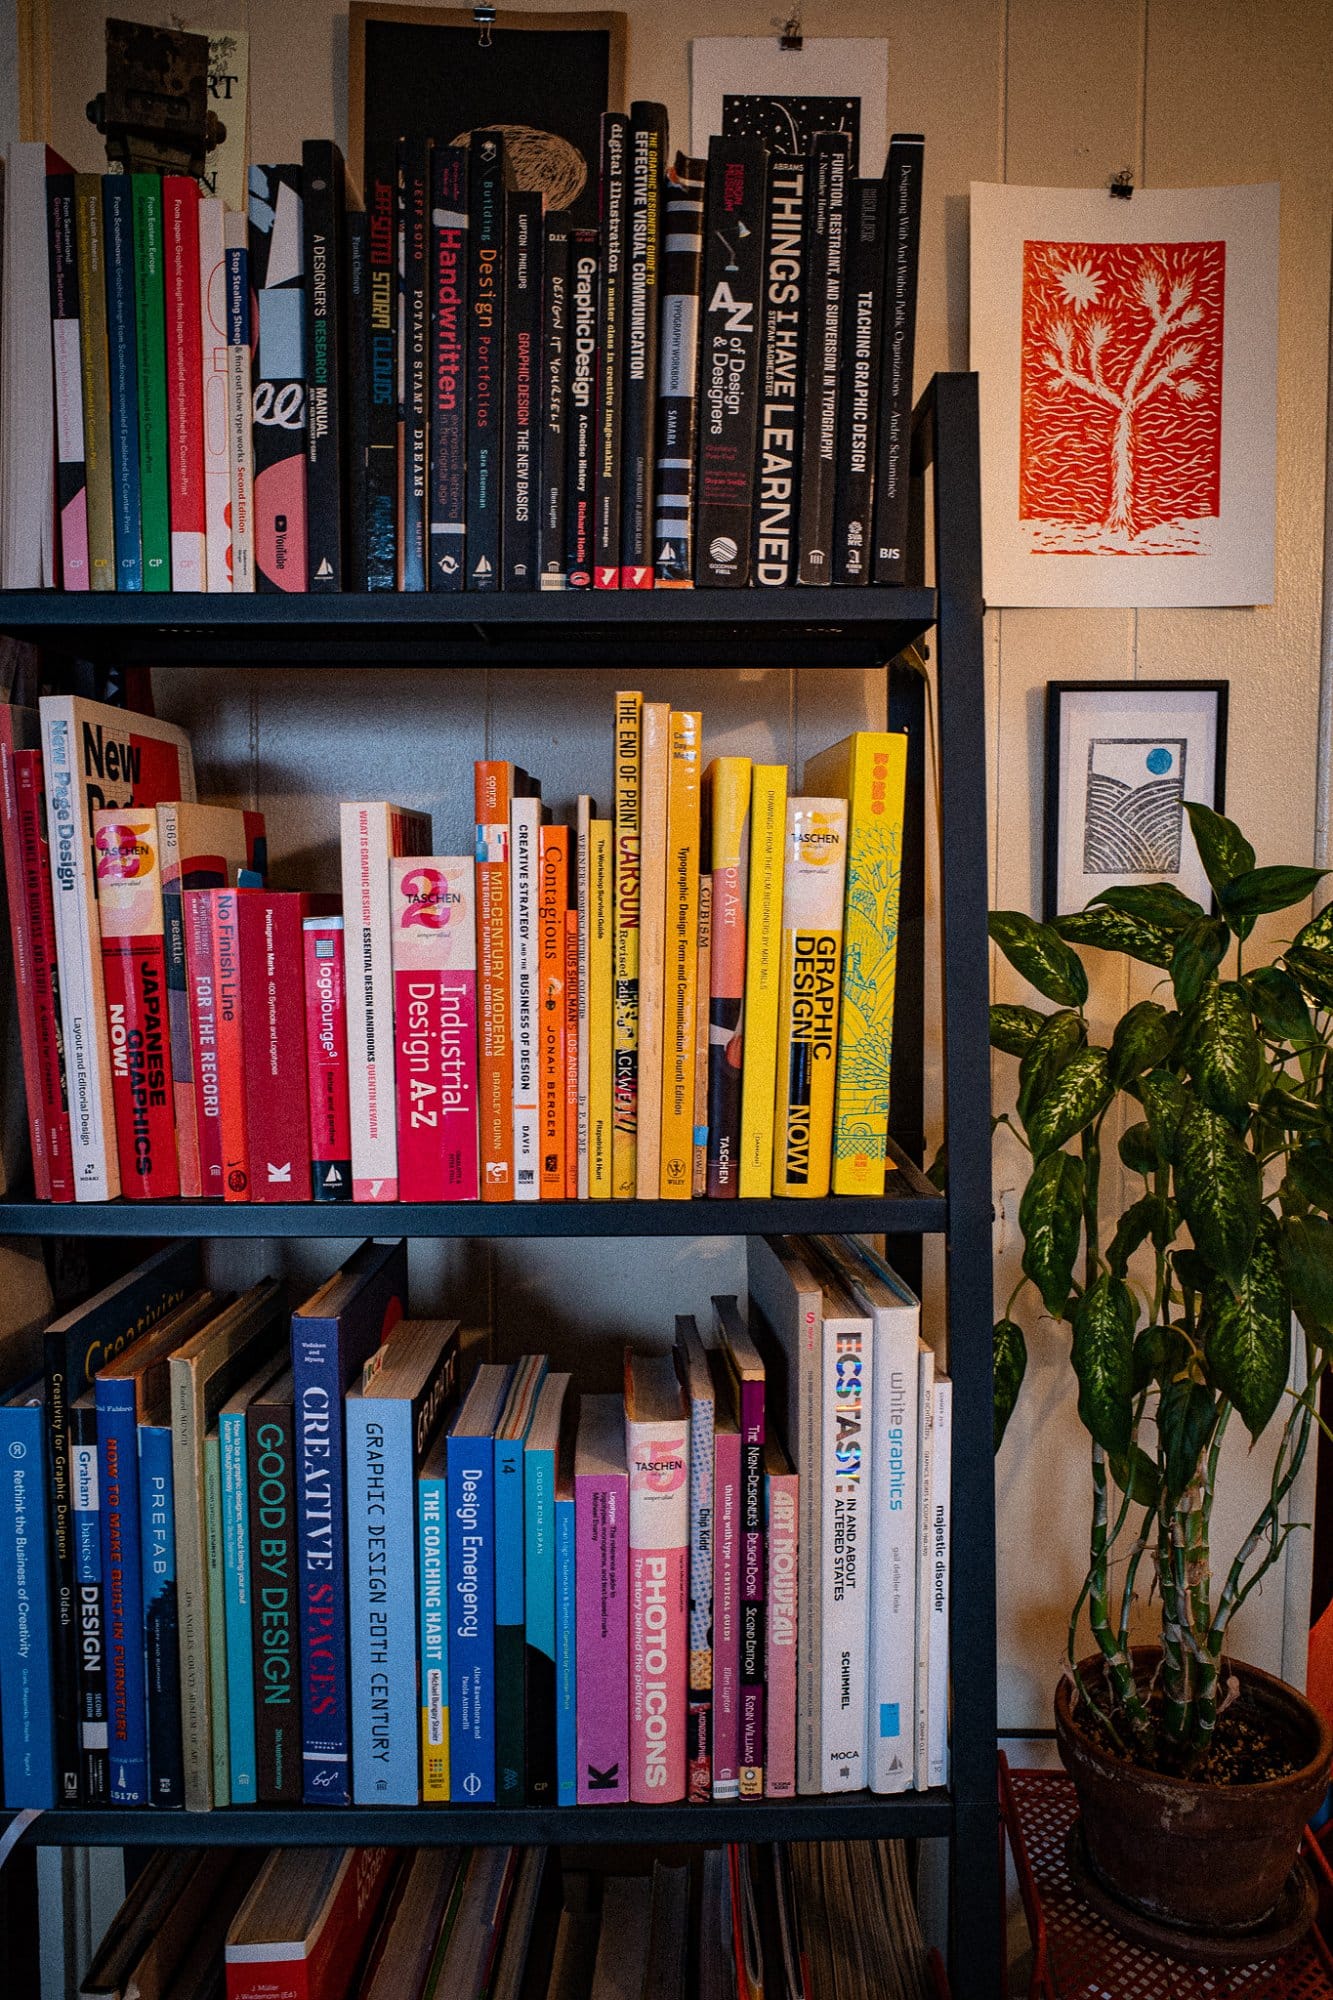 A bookshelf packed with colourful books on design and creativity, next to a potted plant and a red tree print on the wall